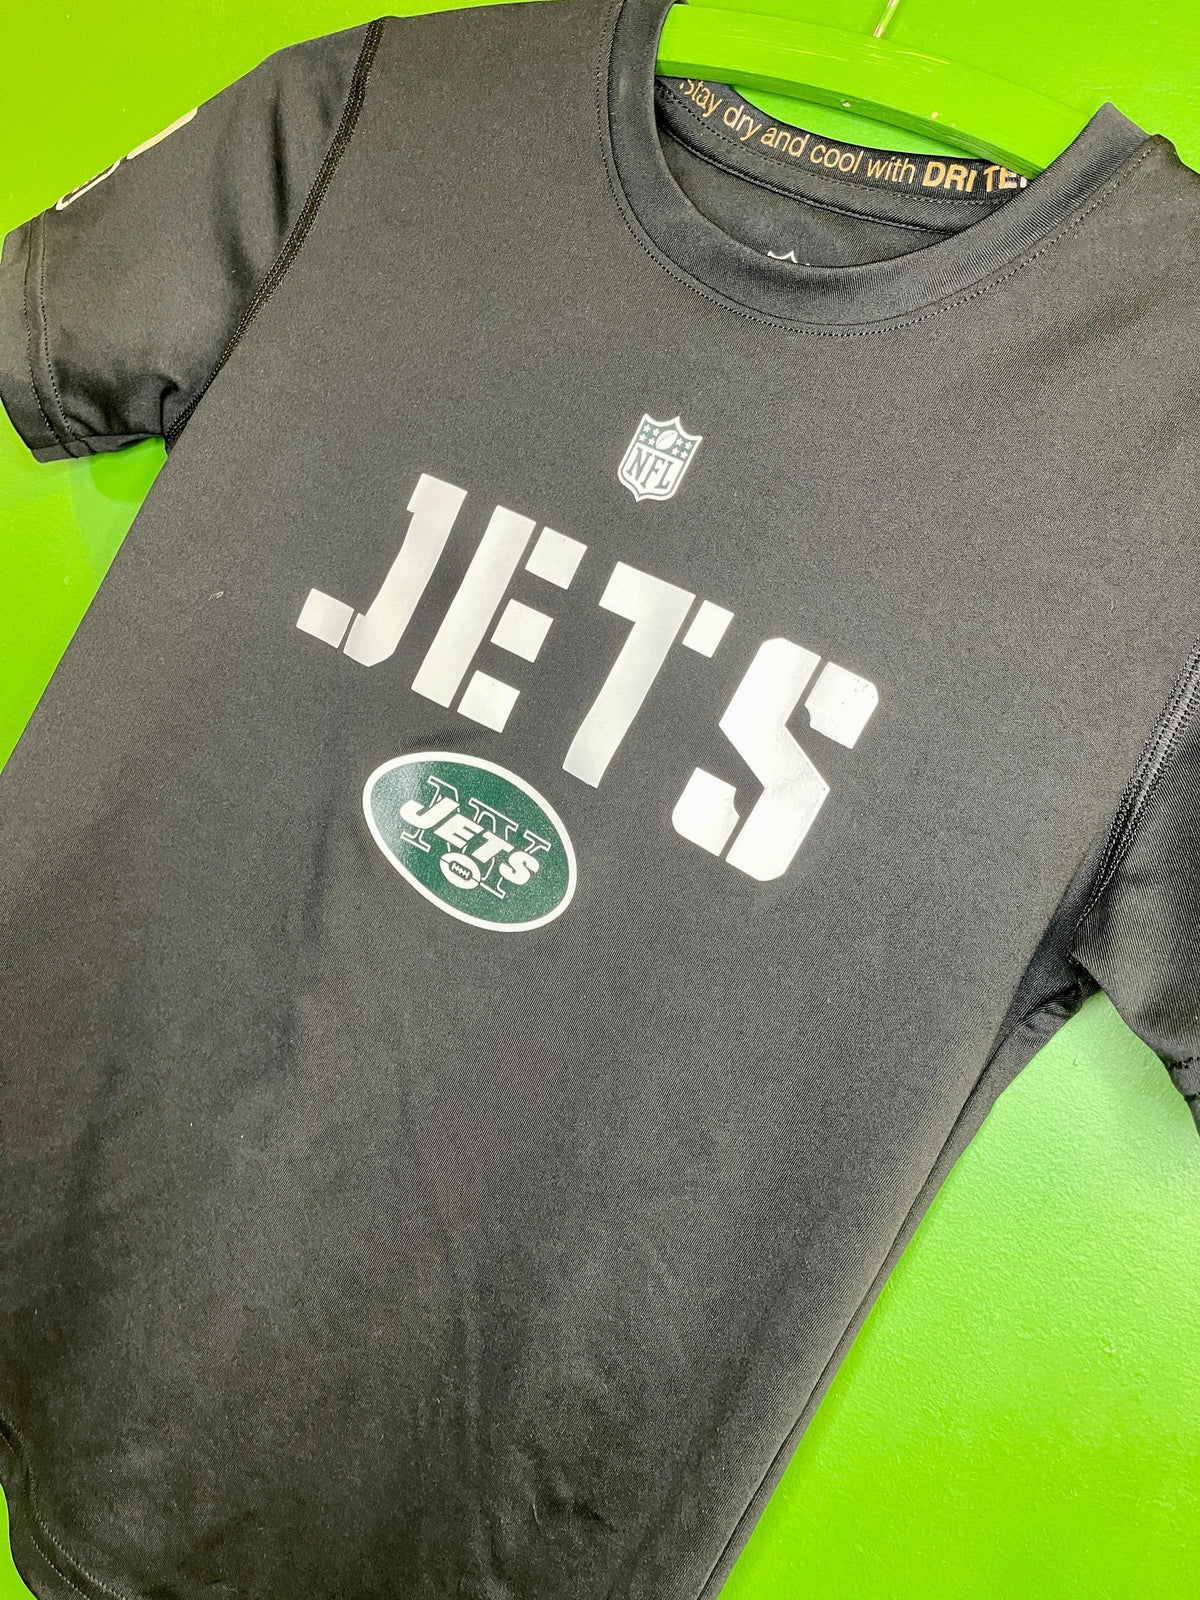 NFL New York Jets Wicking T-Shirt Youth Small 8